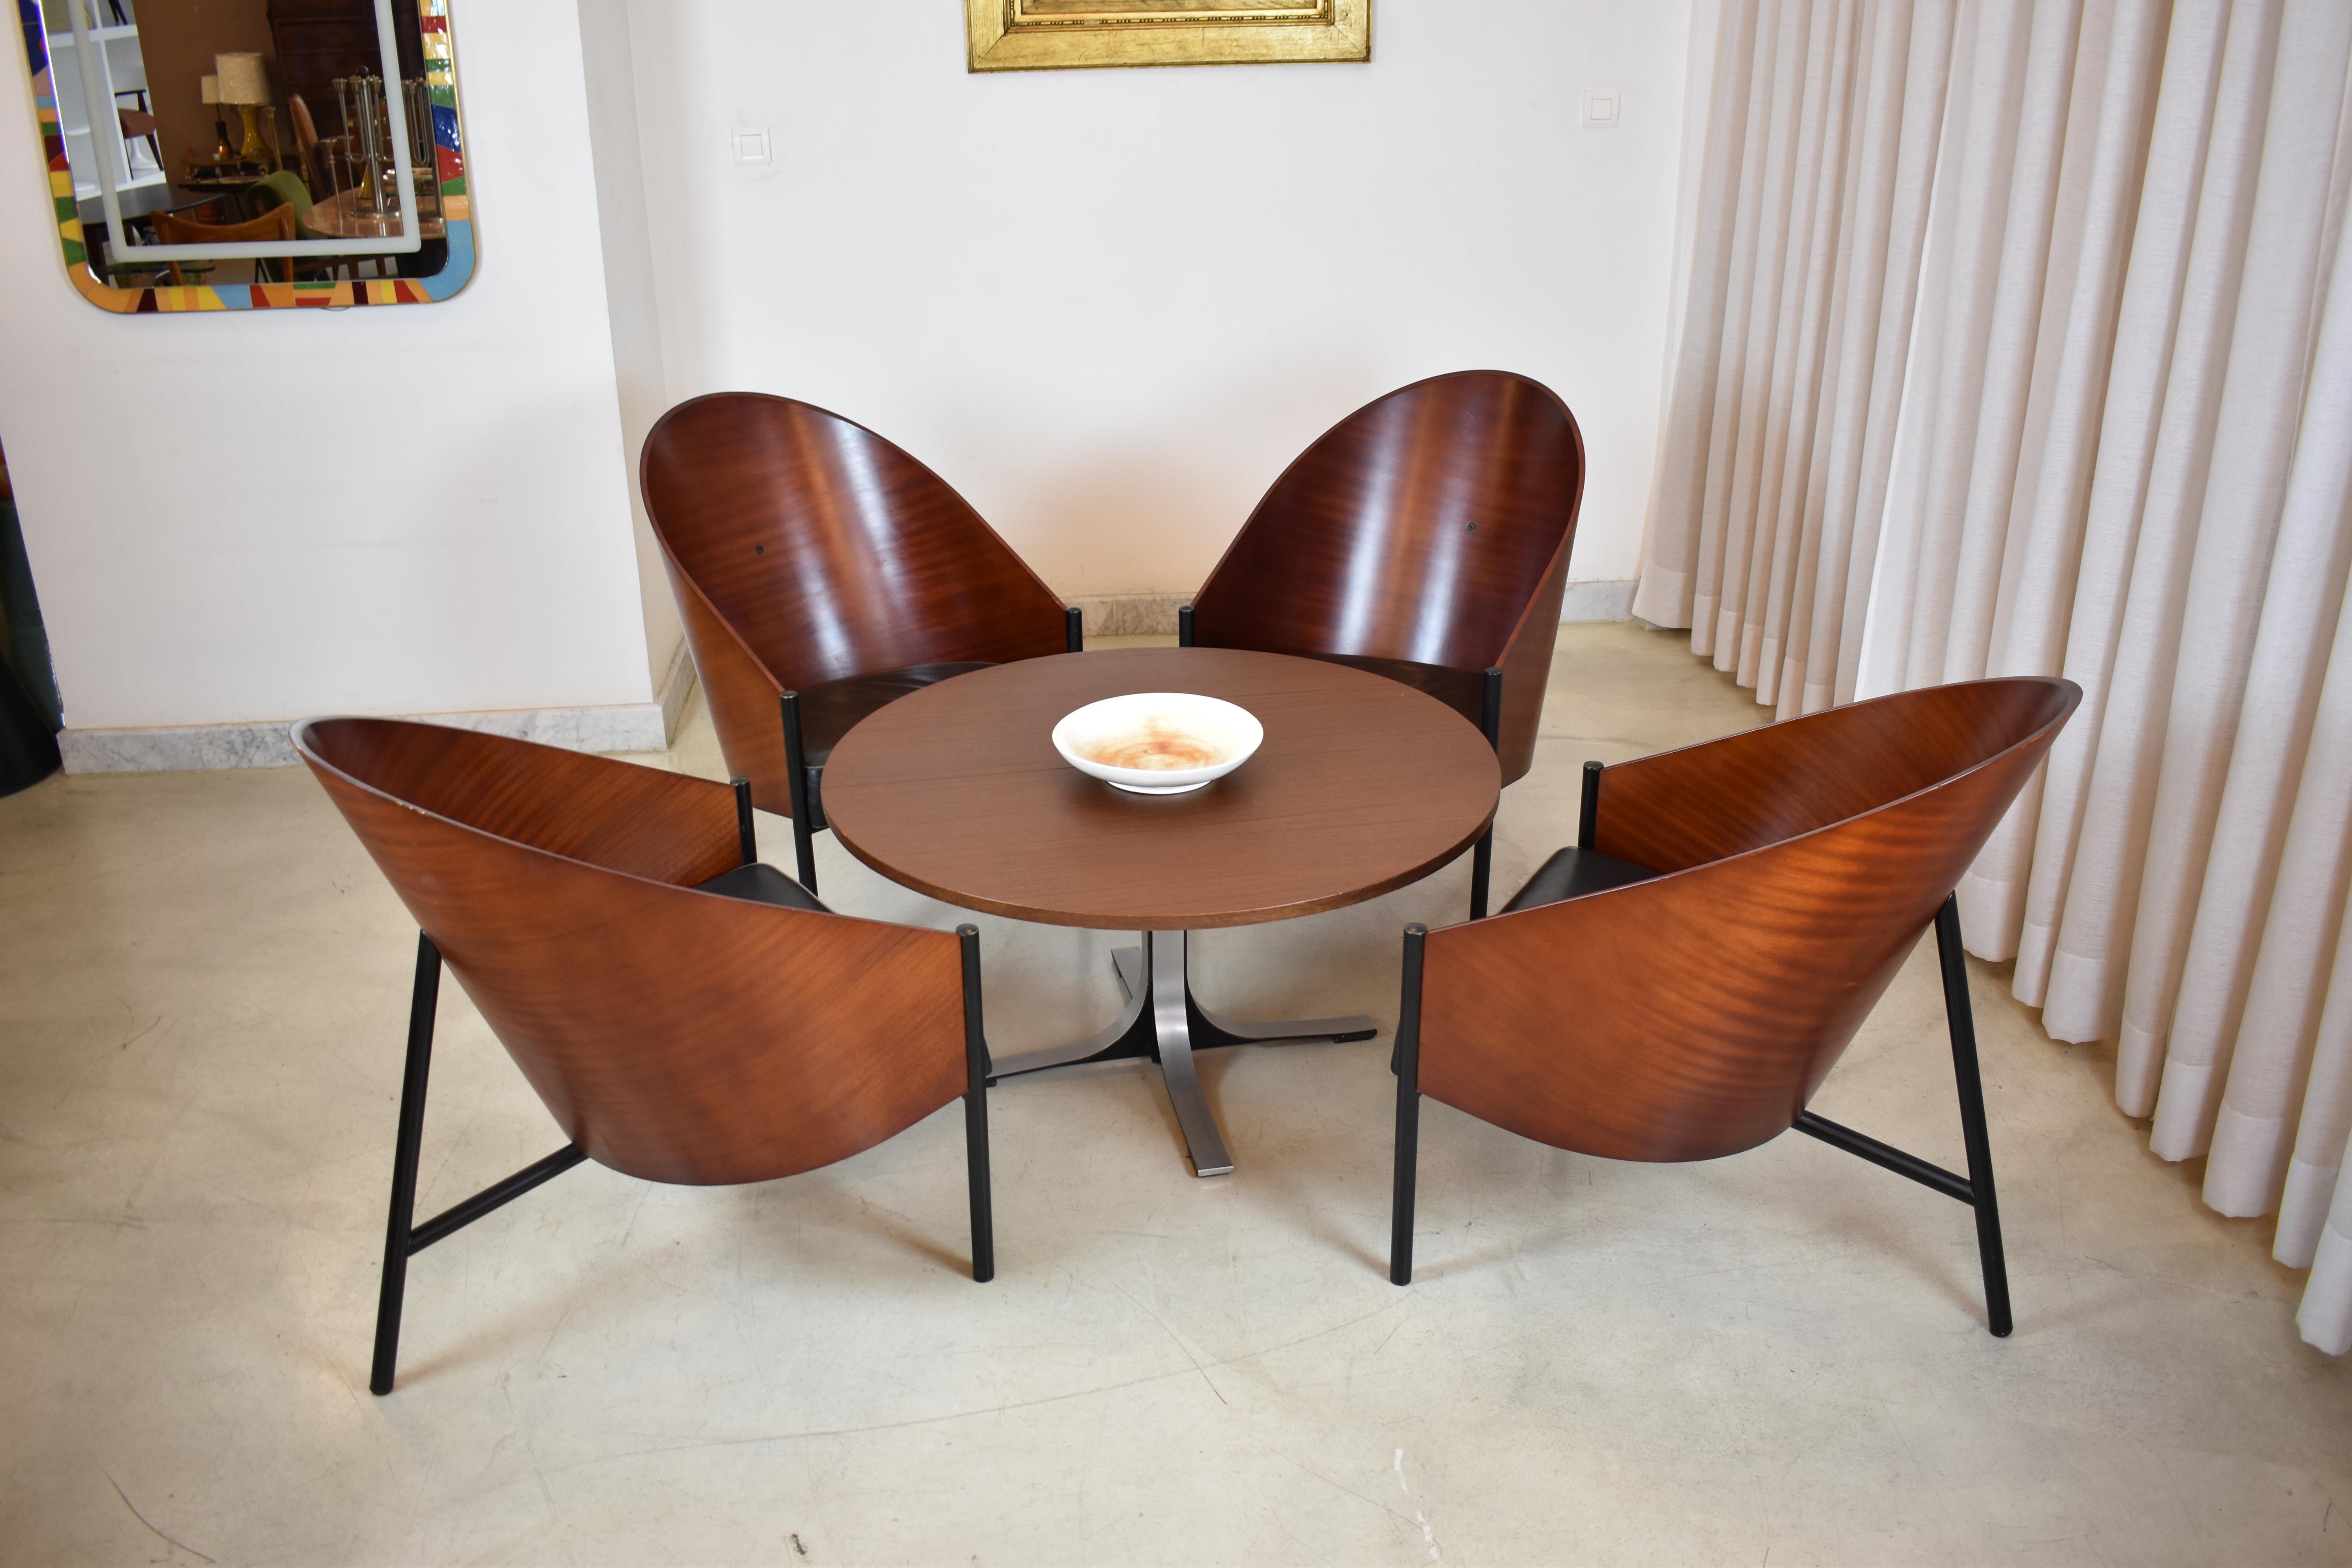 Set of Four Philippe Starck Armchairs, 1st Ed., Pratfall for Driade, Italy, 1984 For Sale 4